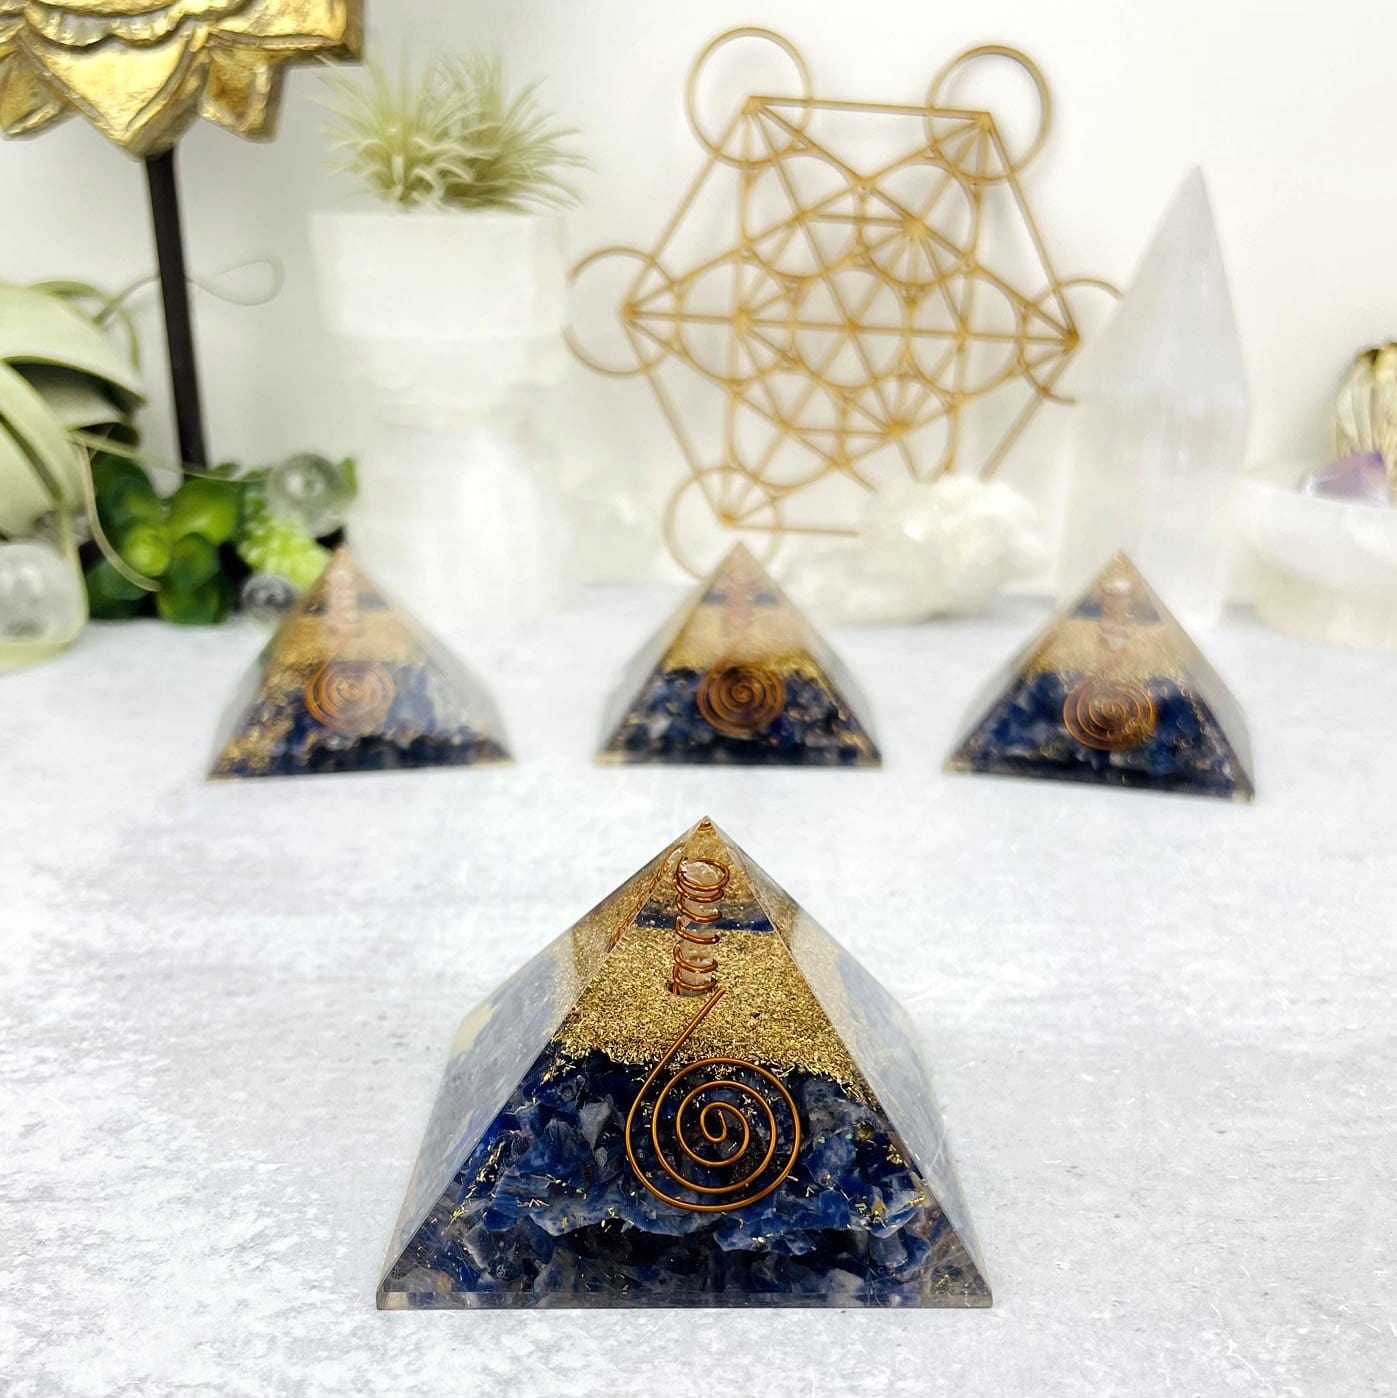 4 Orgone Sodalite with Crystal Point Pyramid displayed, 3 out of focus and 1 in focus.